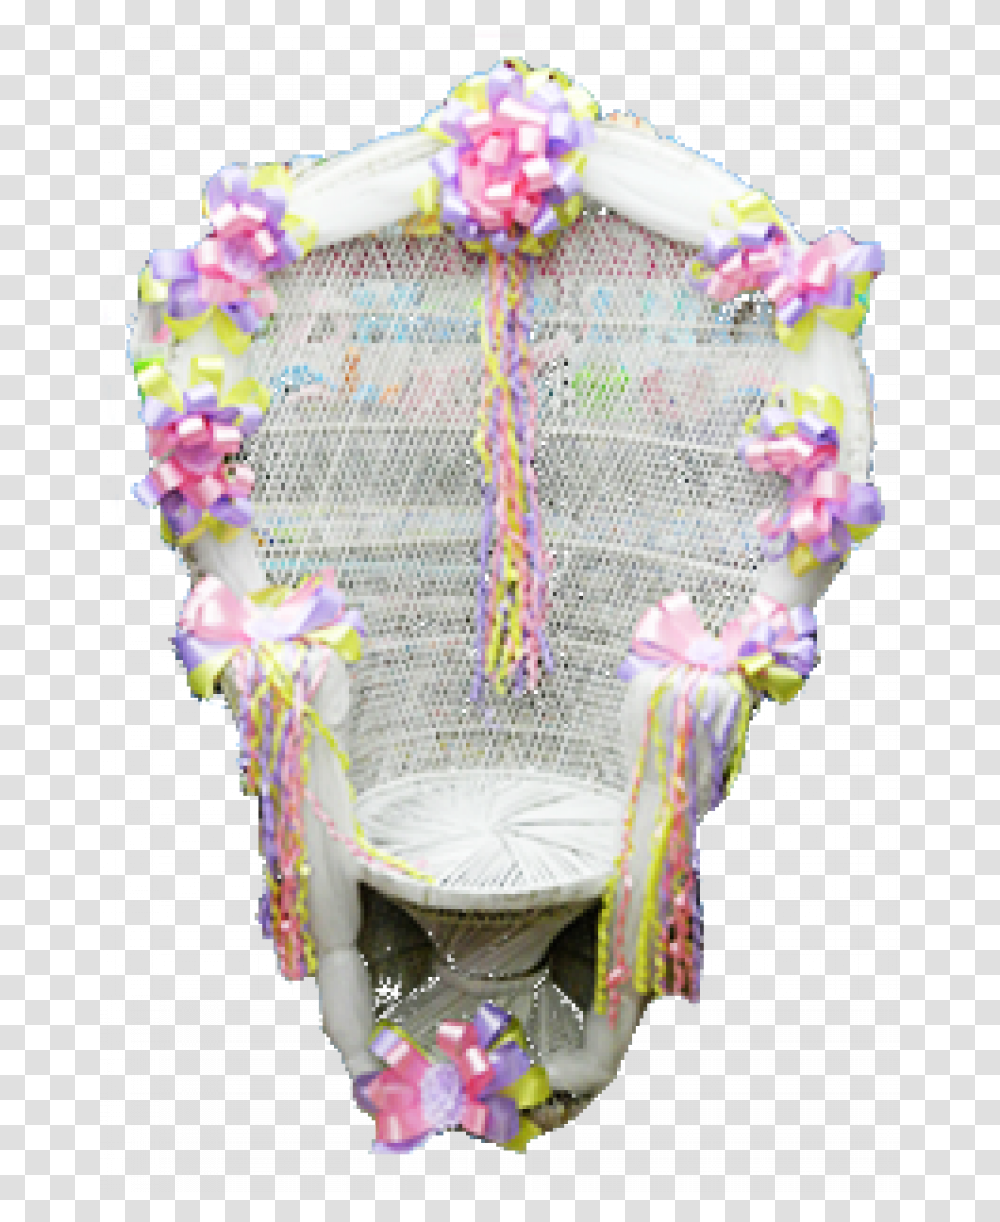 Baby Shower Party Chair Rental Baby Shower Chair, Furniture, Plant, Flower, Blossom Transparent Png